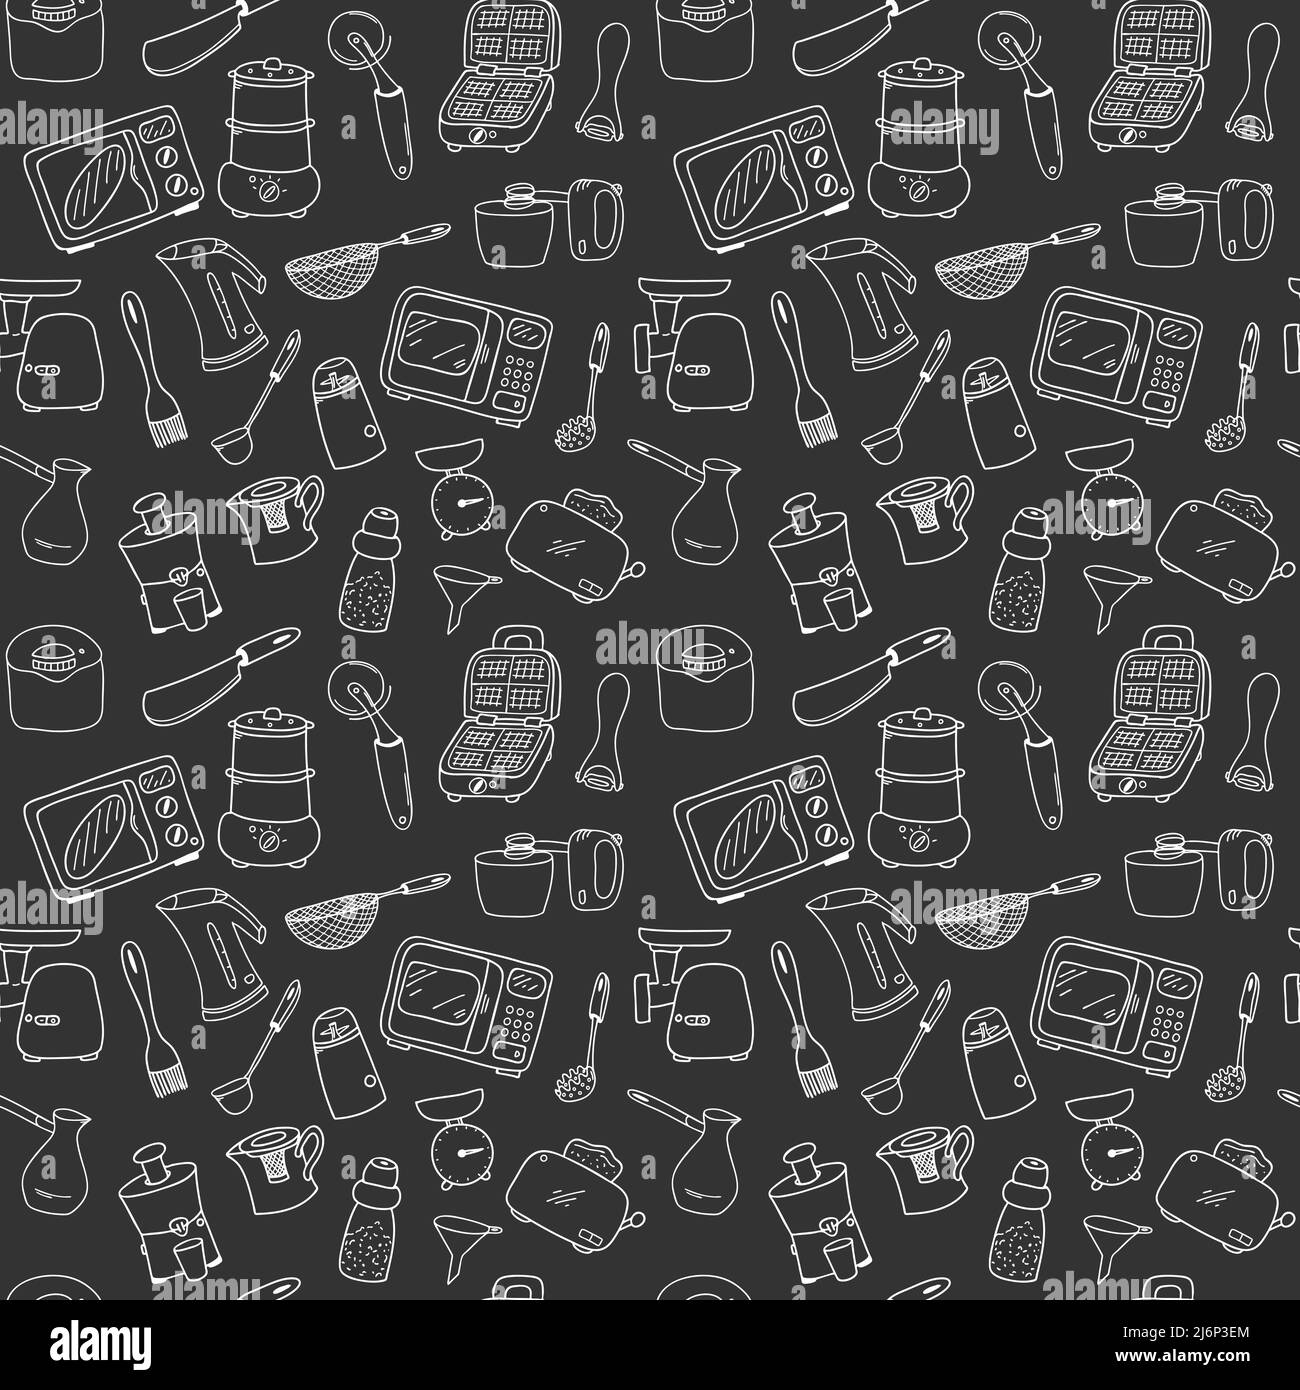 Seamless pattern with elements of kitchen utensils, utensils and appliances. Black-white background for menu design,brochures, web pages.Doodle illust Stock Vector